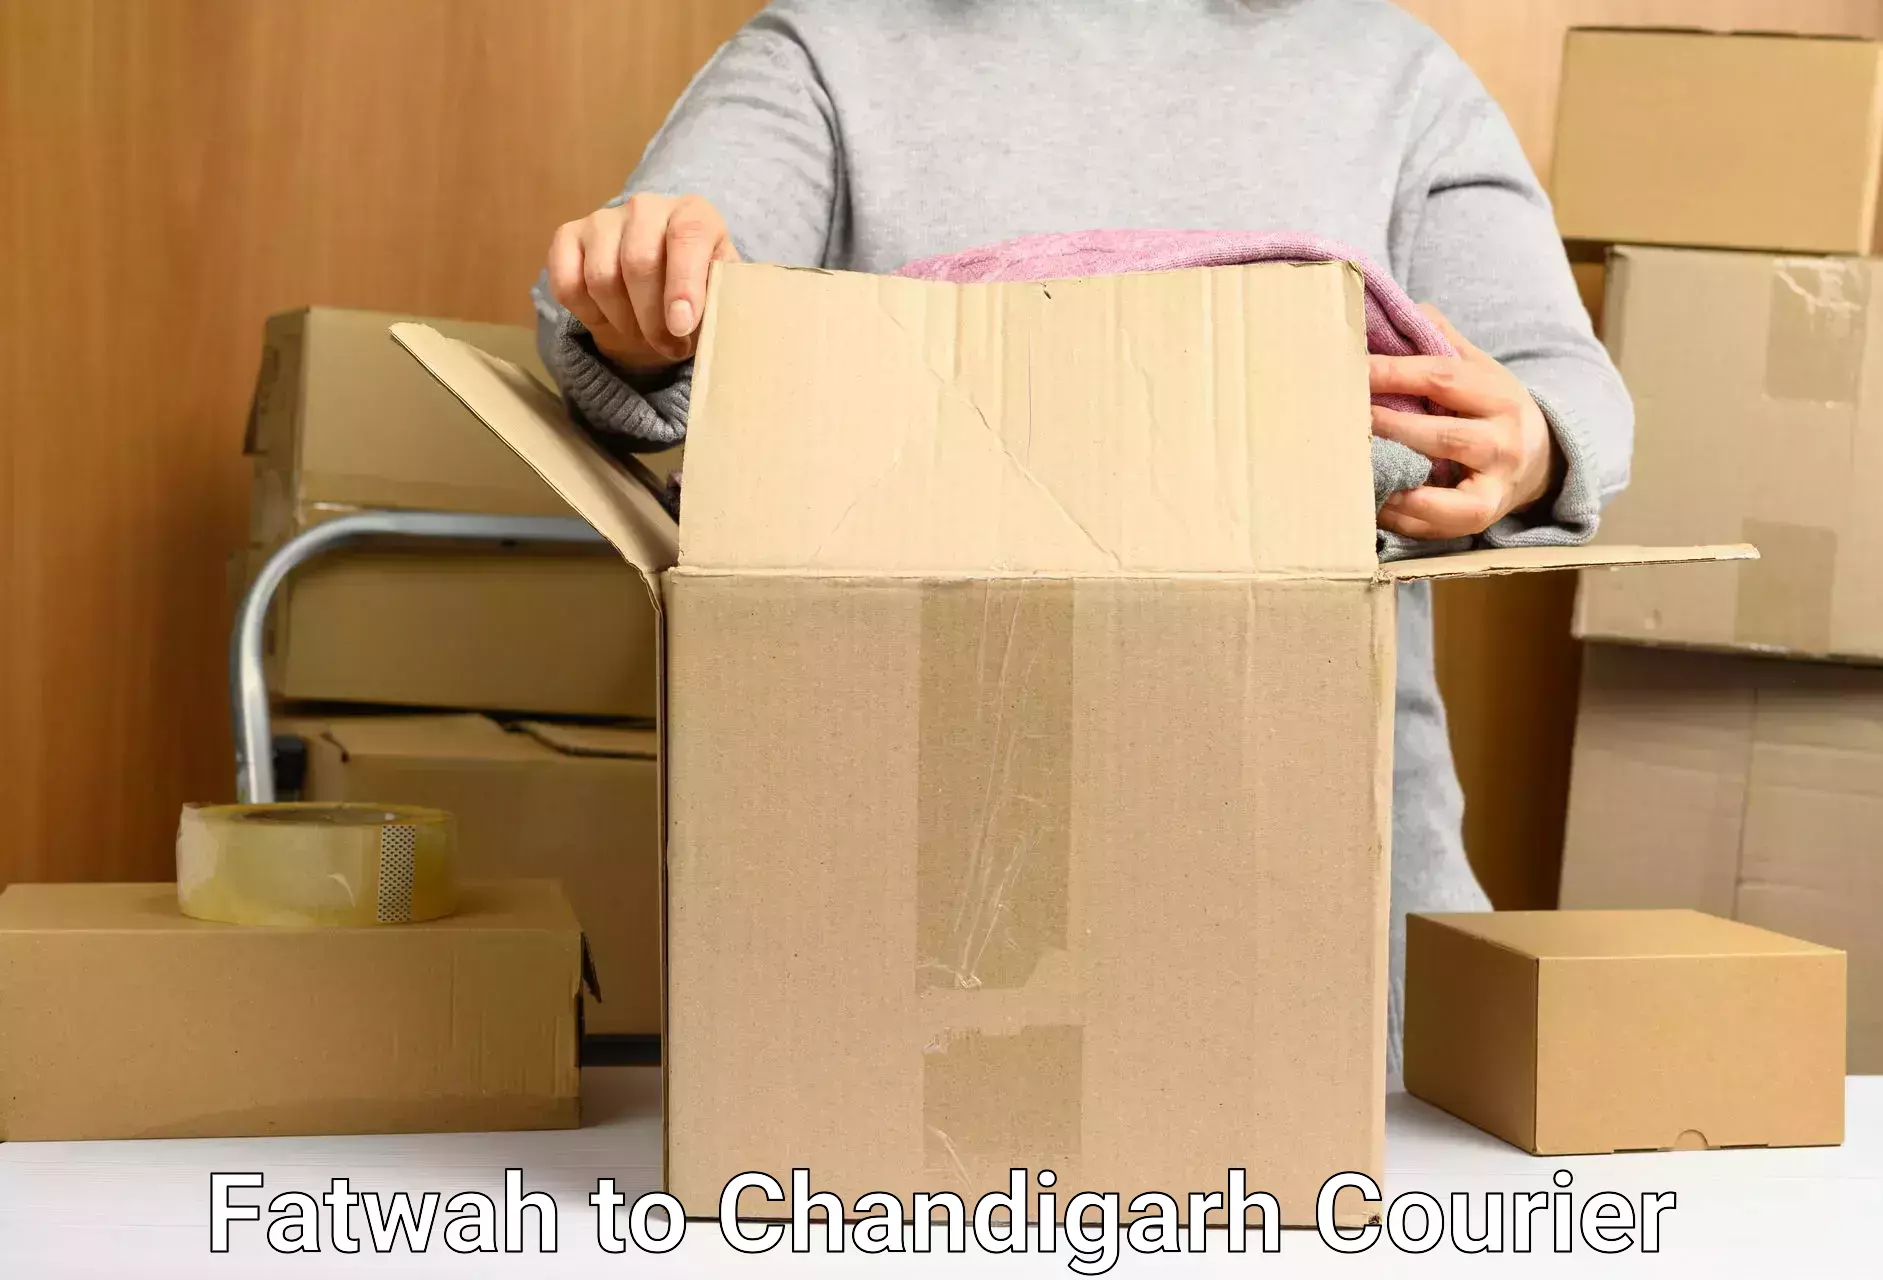 Next-day delivery options Fatwah to Chandigarh